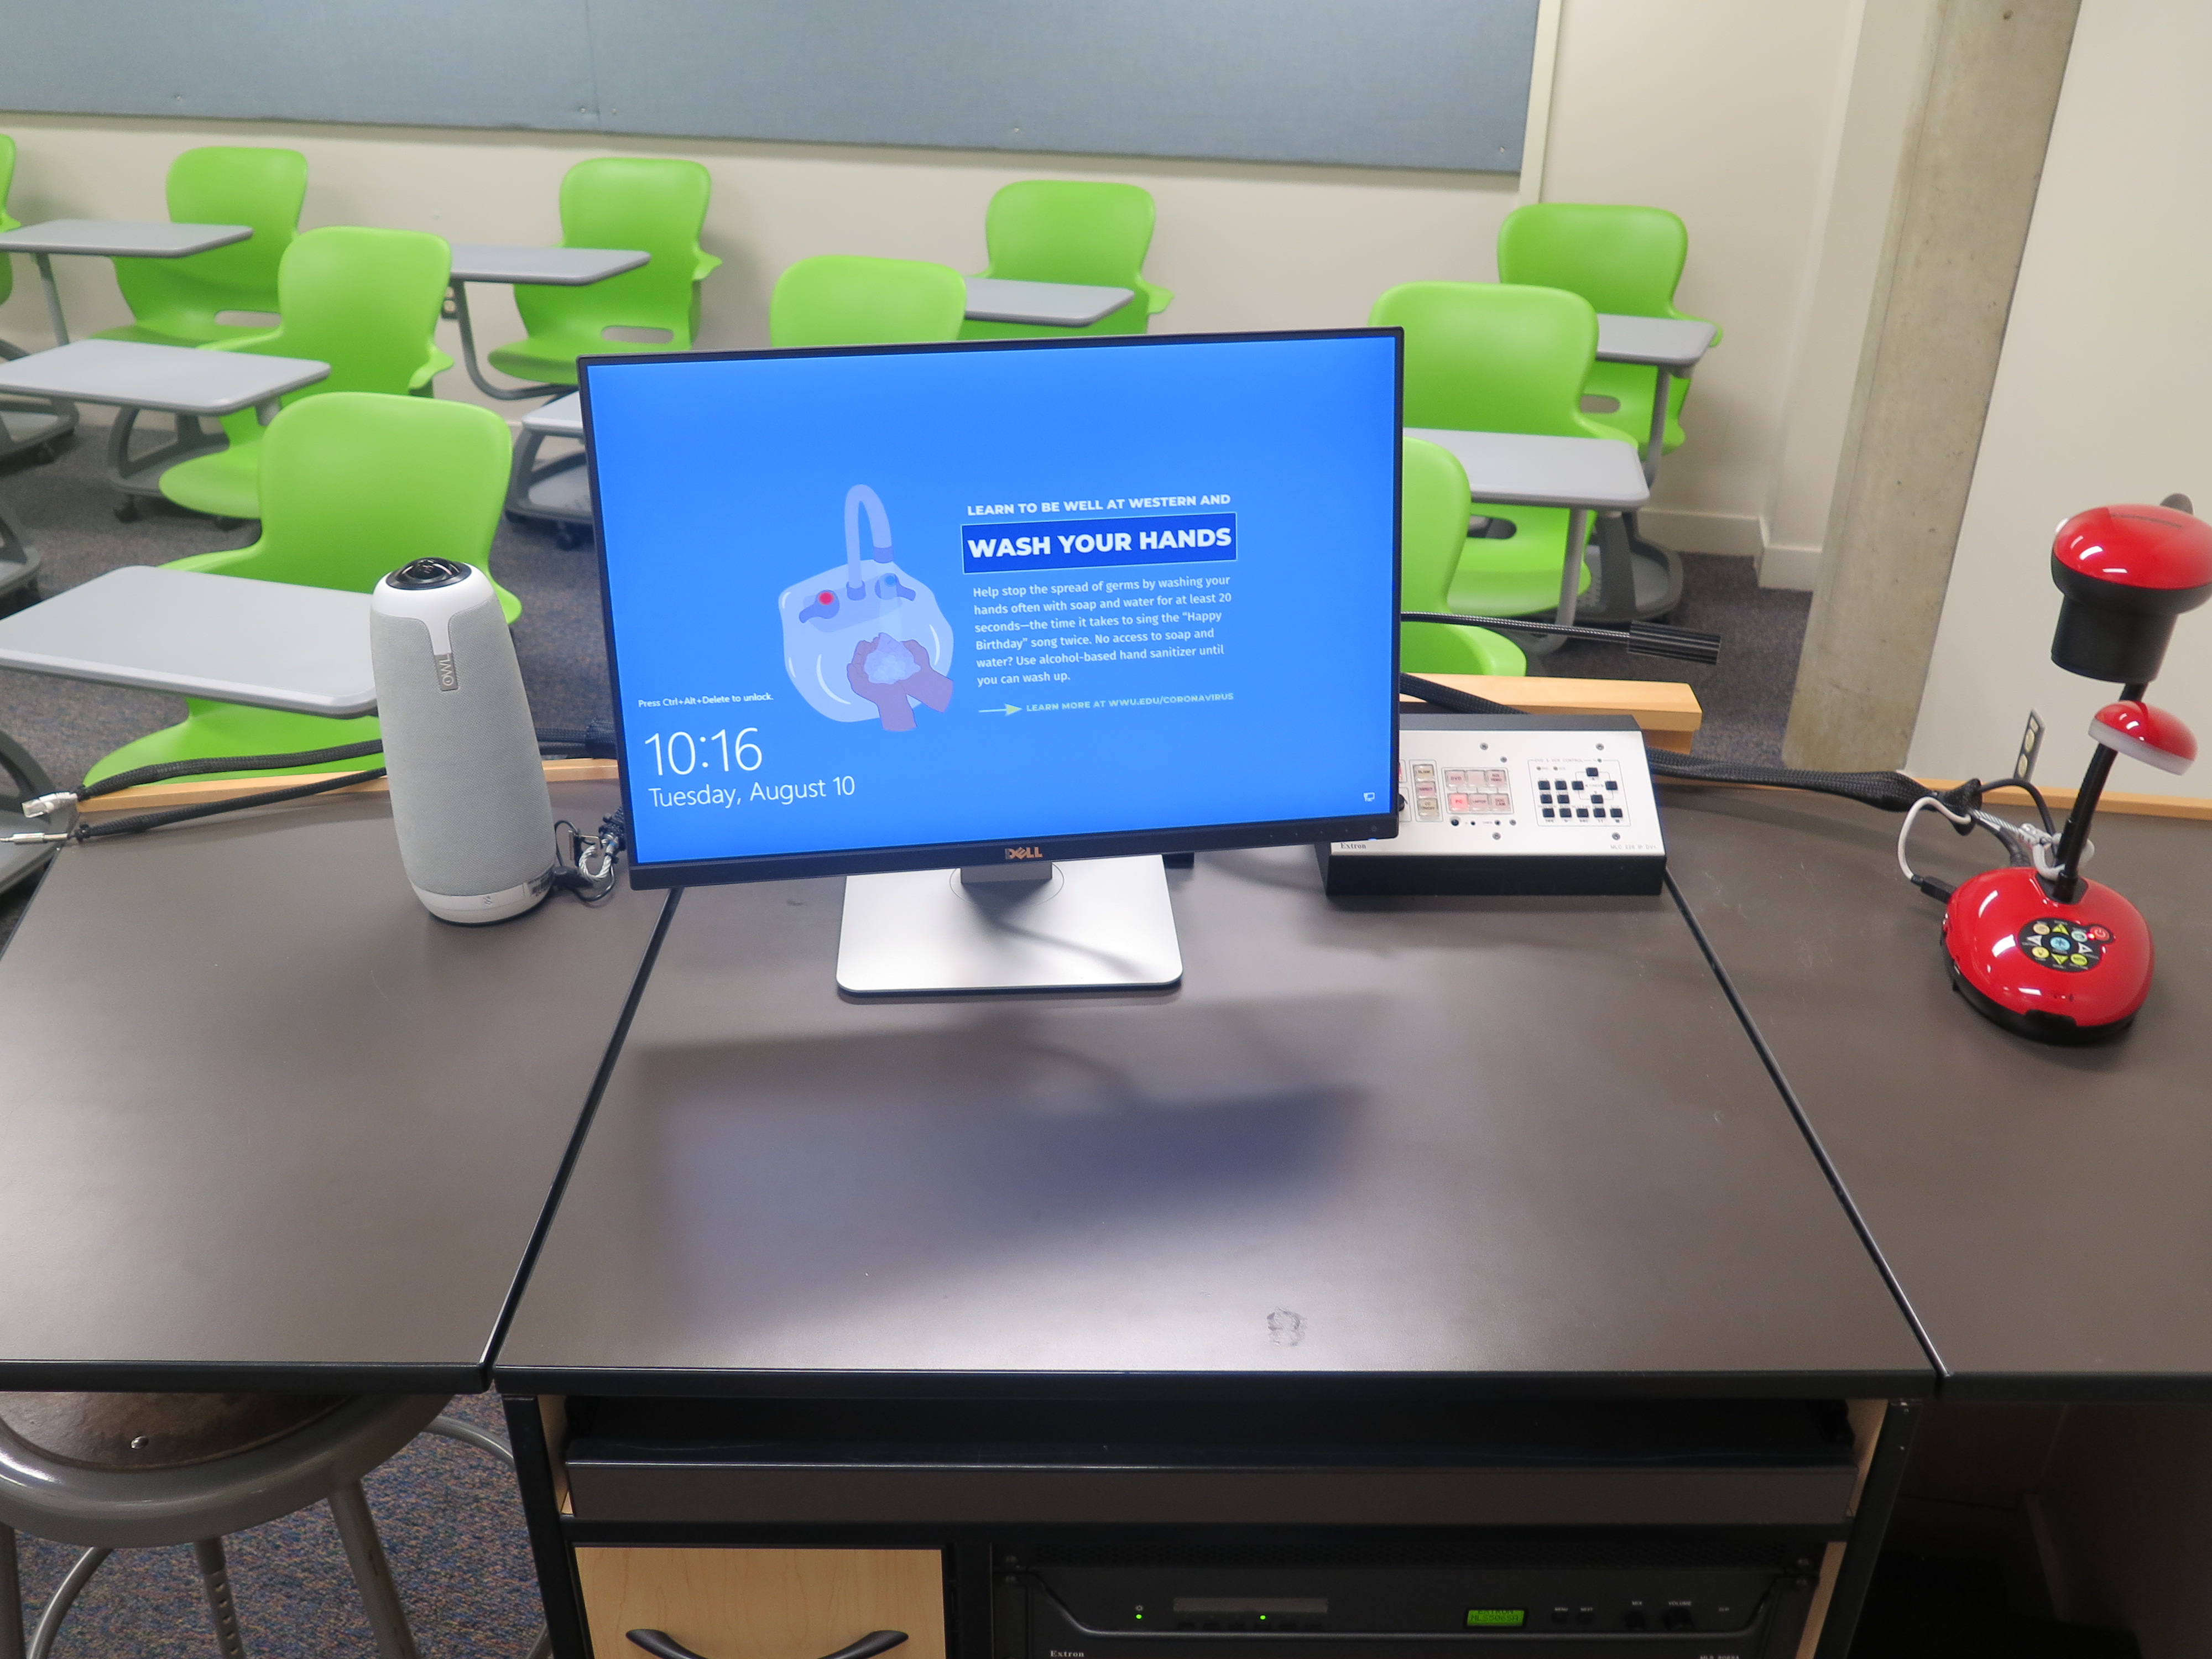 on top of podium is owlcam, dell computer monitor, AV push button controller, and lumins ladybug document camera